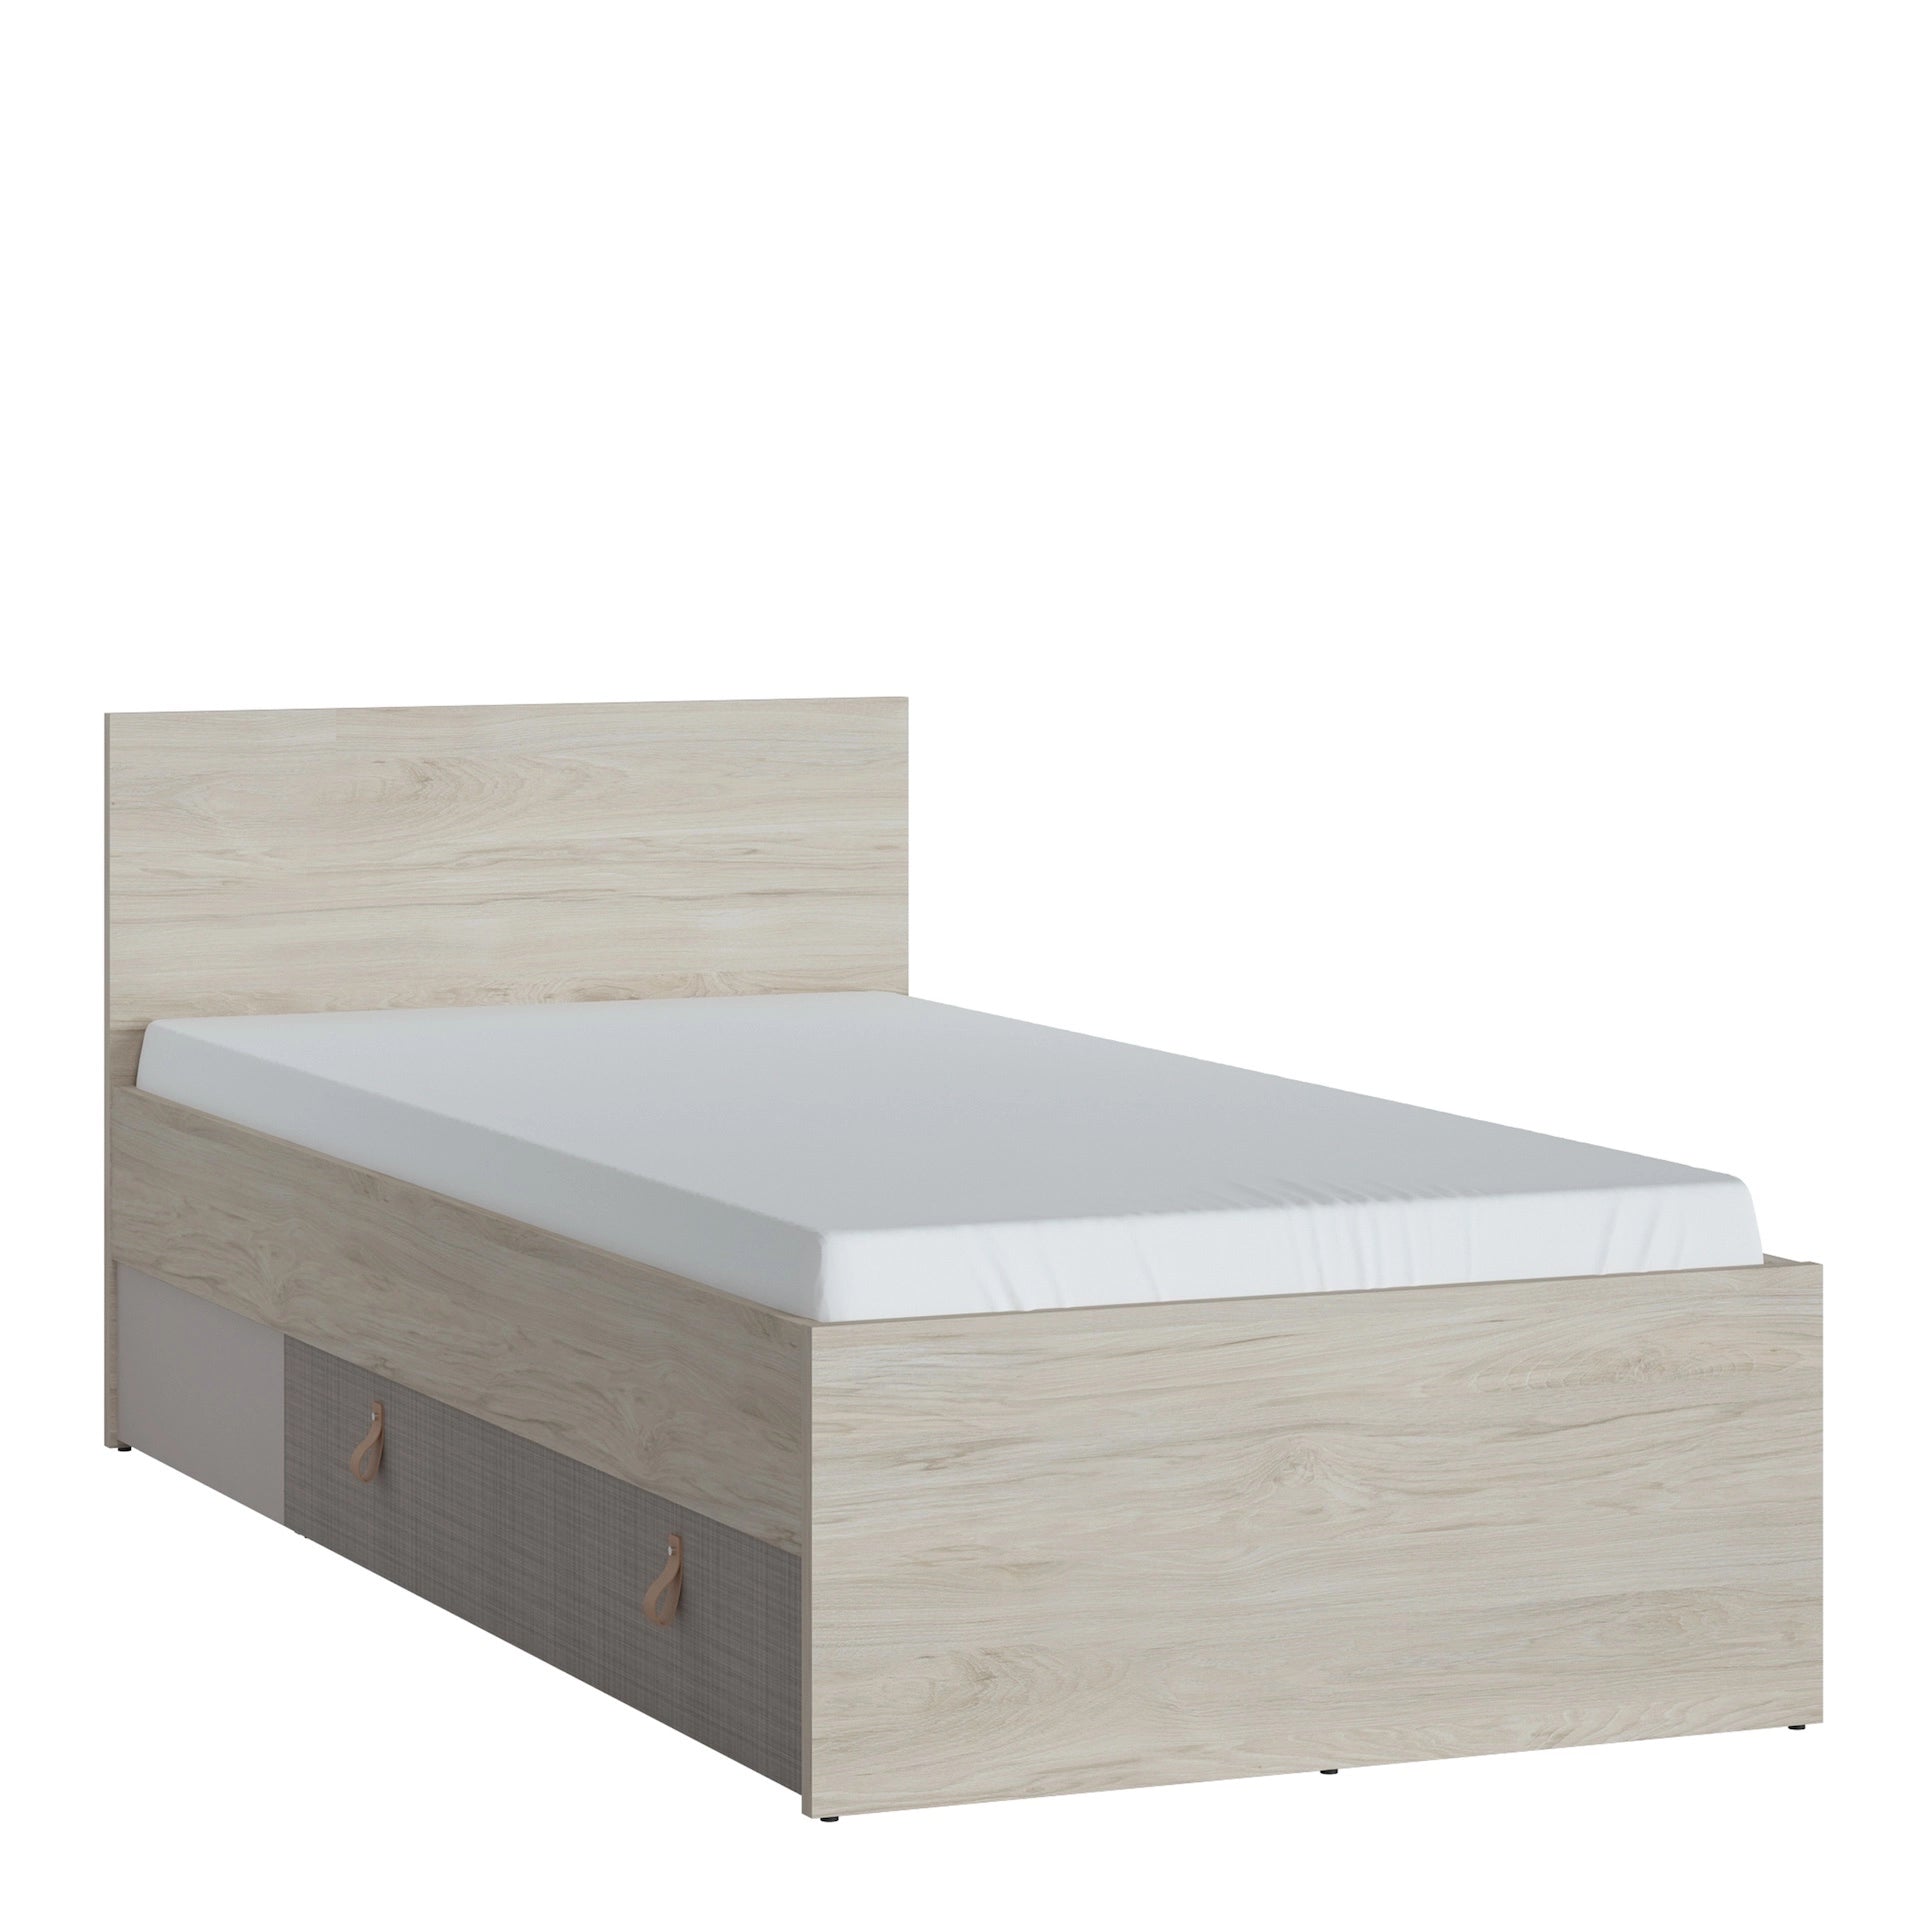 Furniture To Go Denim 3ft Single Bed with 1 Drawer in Light Walnut, Grey Fabric Effect & Cashmere